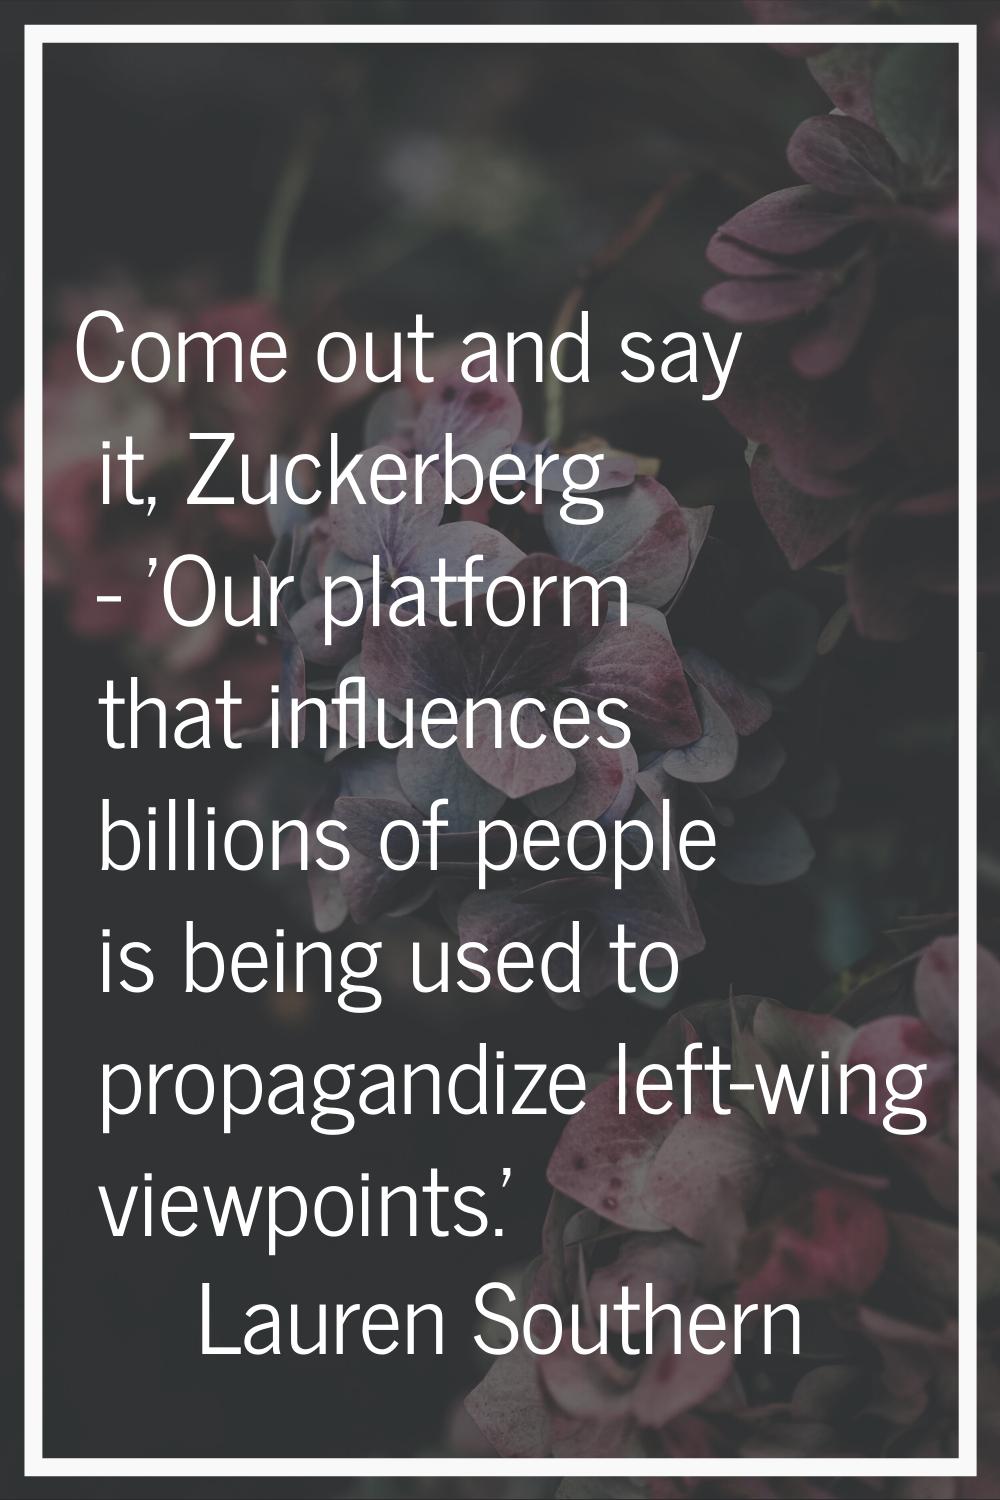 Come out and say it, Zuckerberg - 'Our platform that influences billions of people is being used to